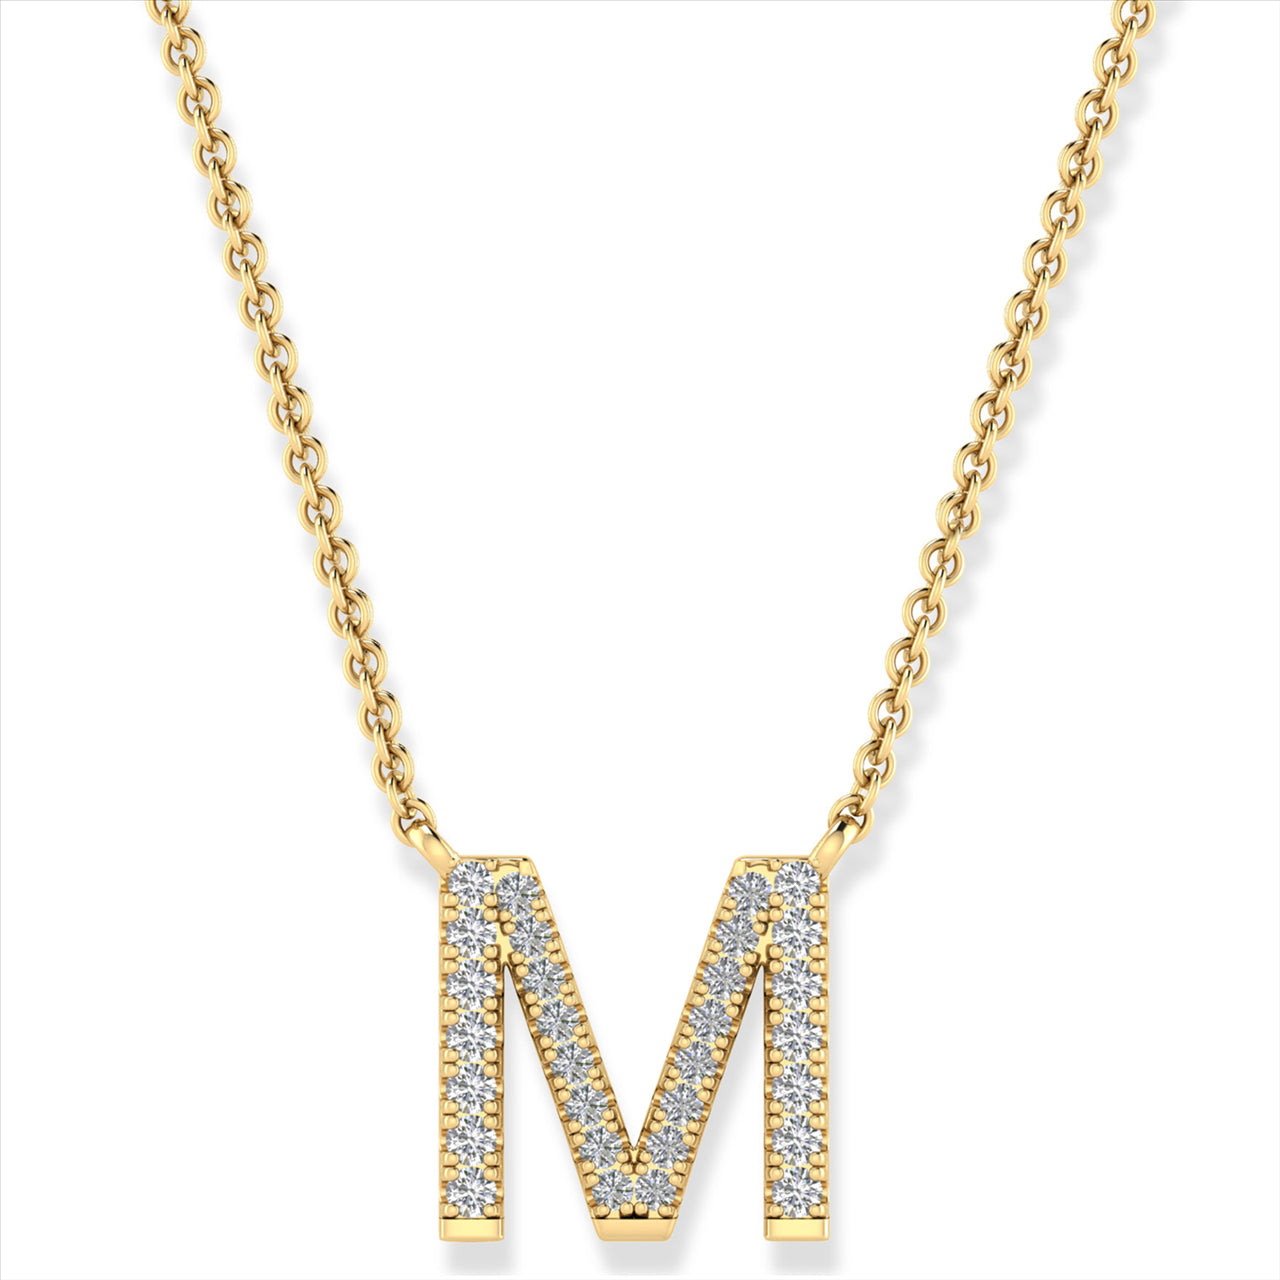 Diamond Set "M" Initial Necklace in 9 carat Yellow Gold